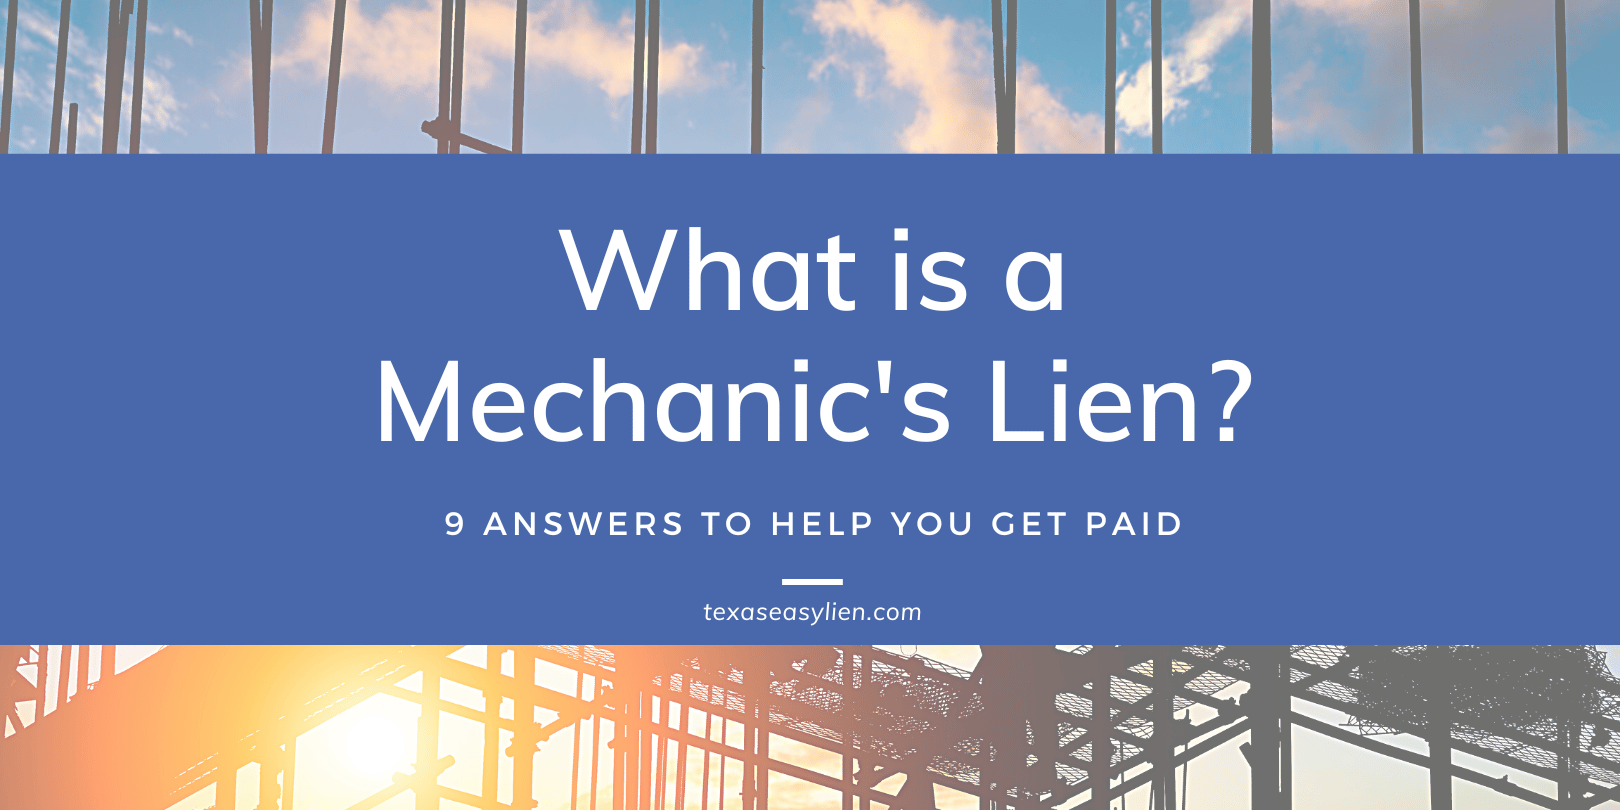 What is a mechanic's lien? 9 answers to help you get paid.